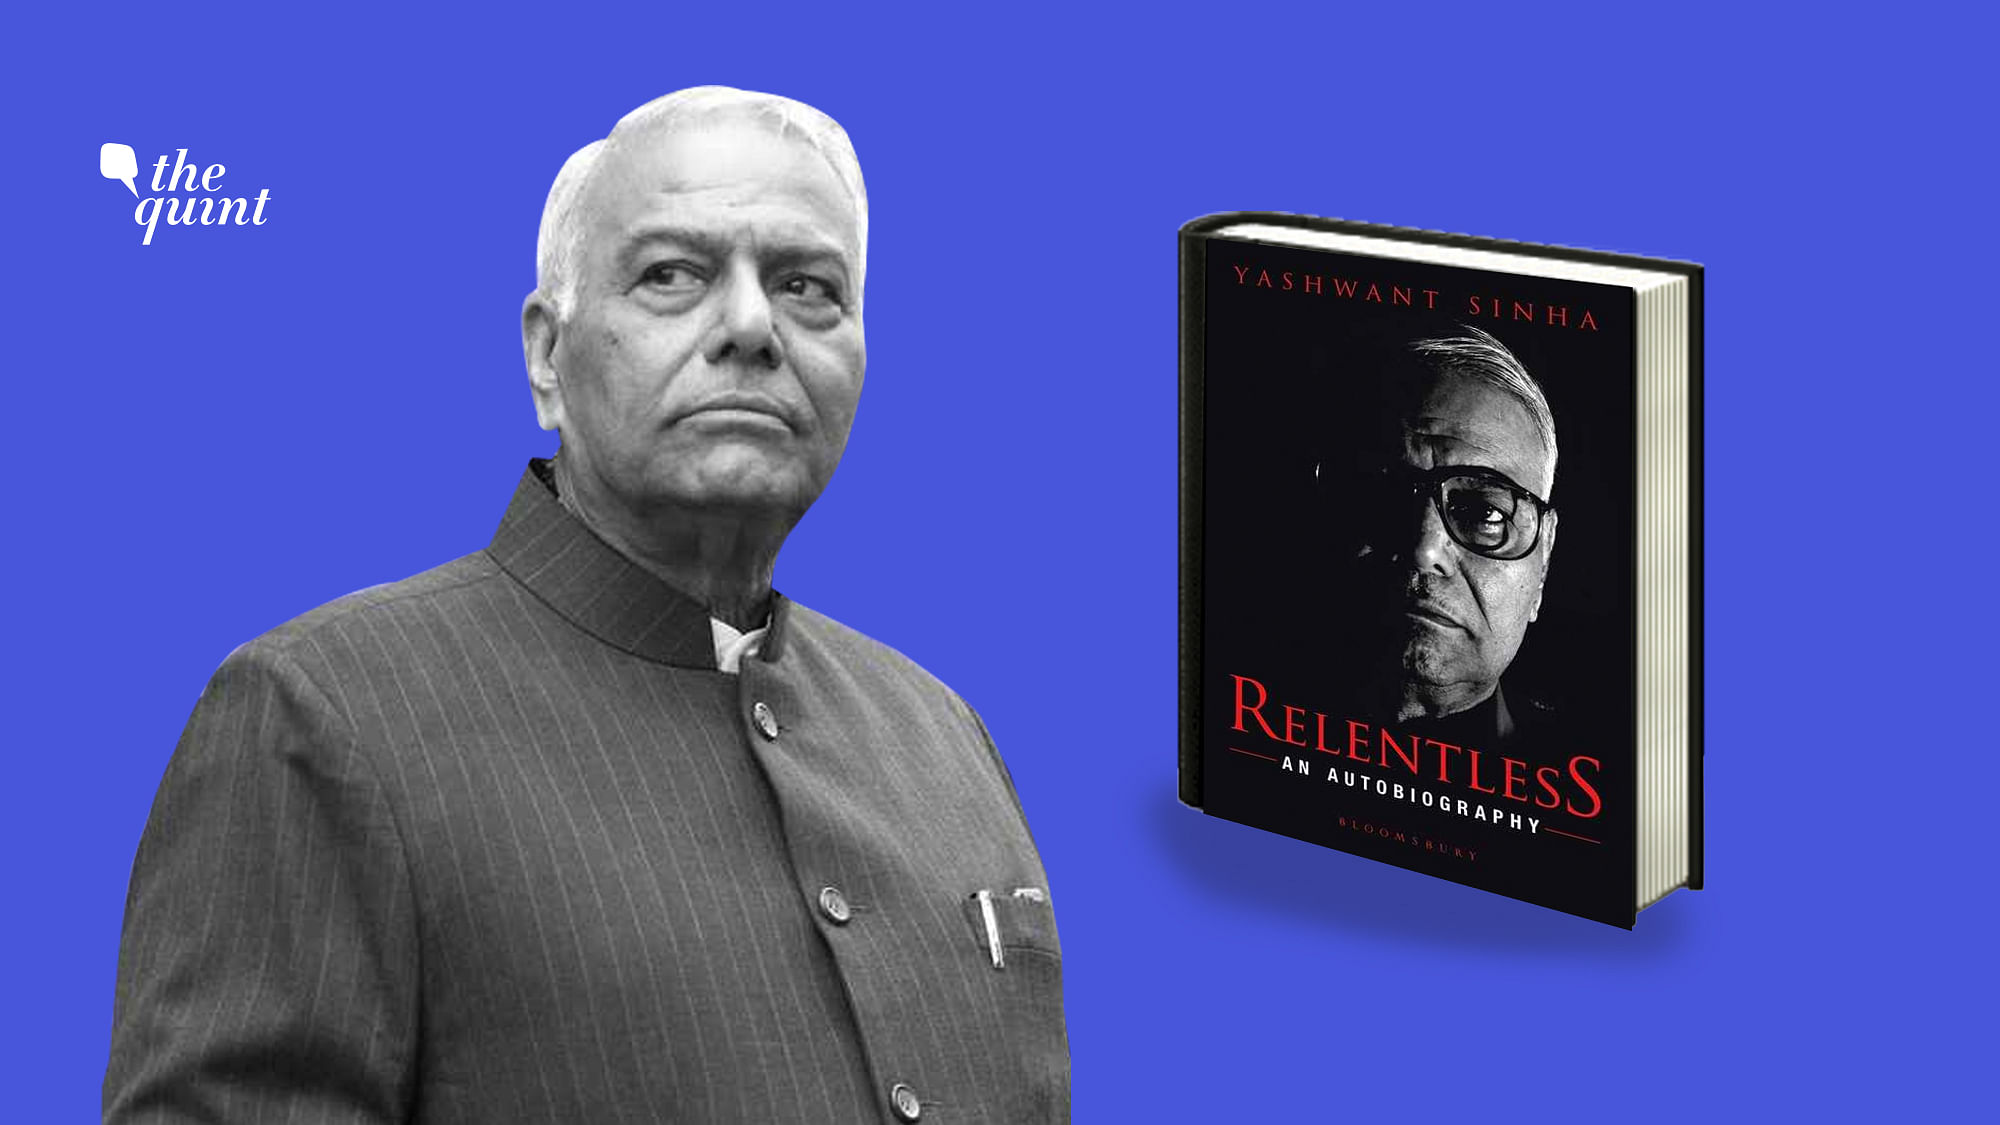 Image of Yashwant Sinha and his book, used for representational purposes.